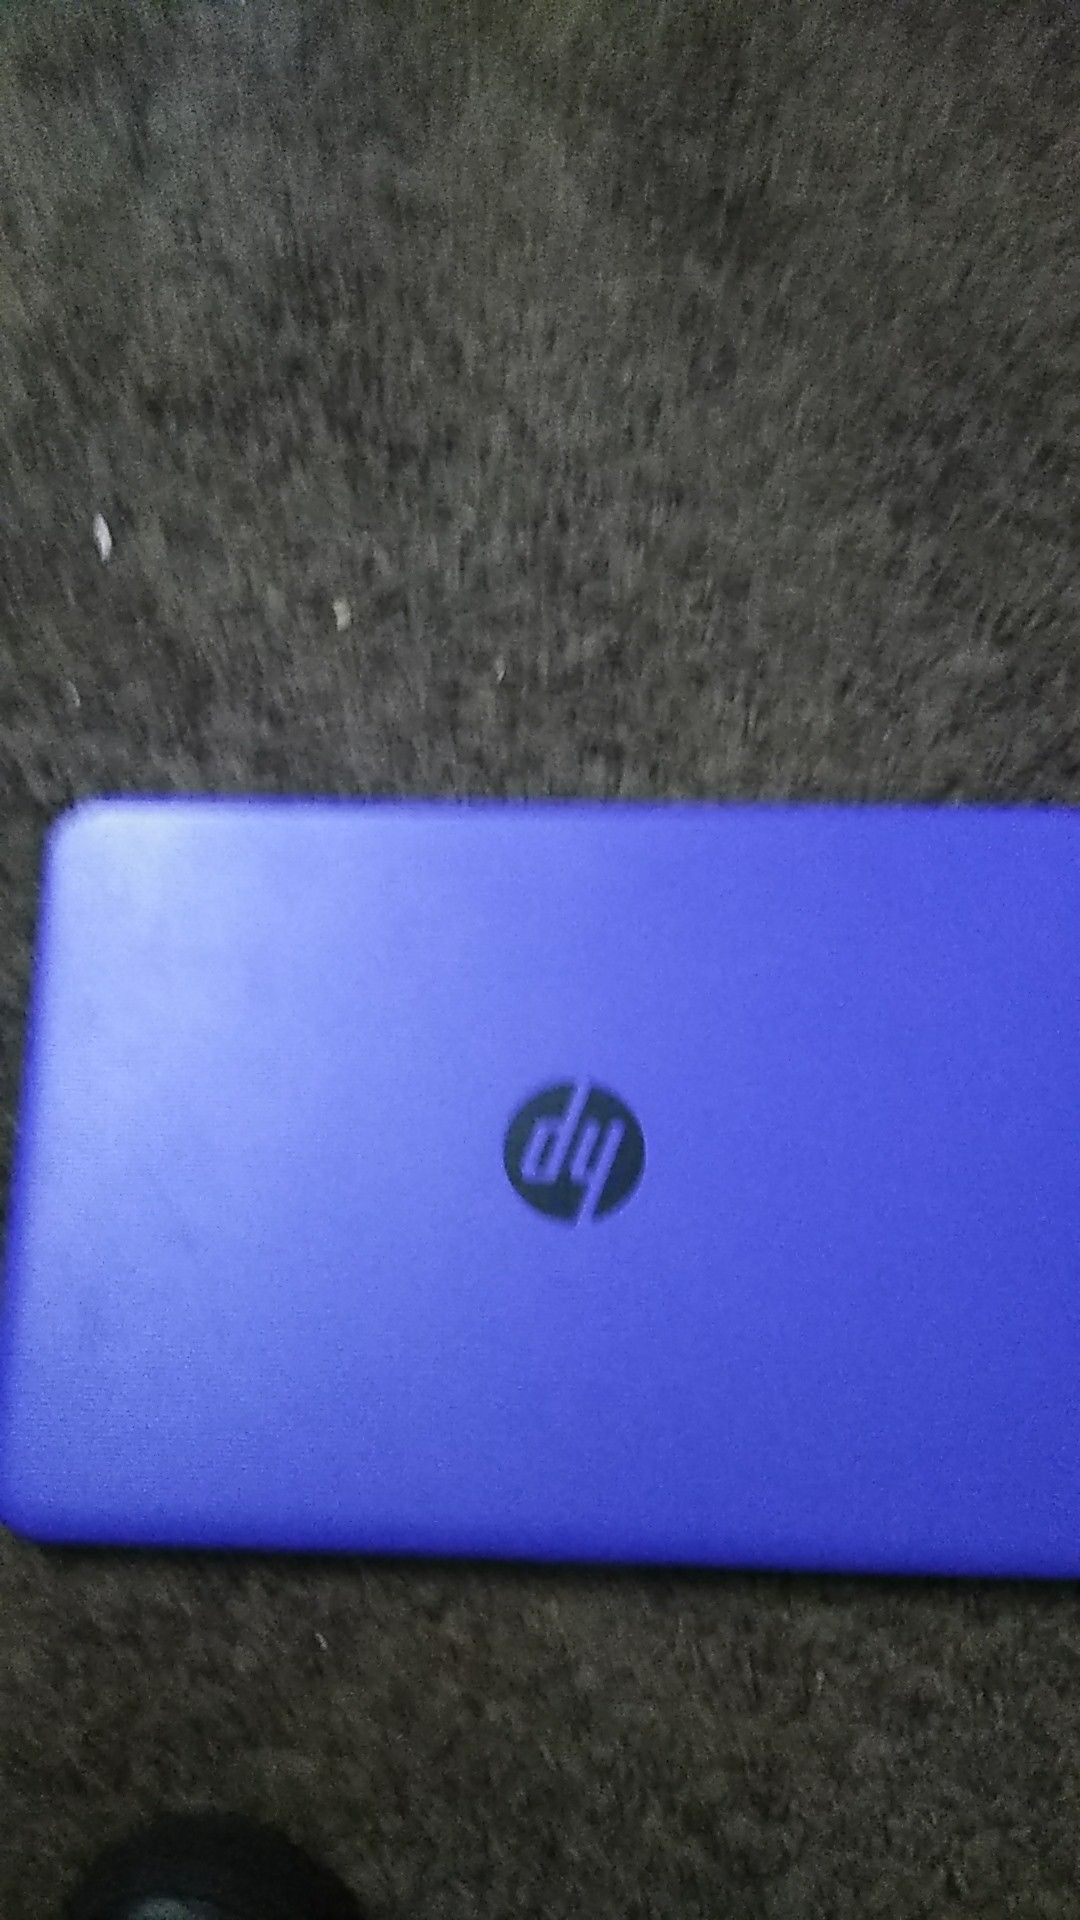 HP laptop wit charge and windows 10